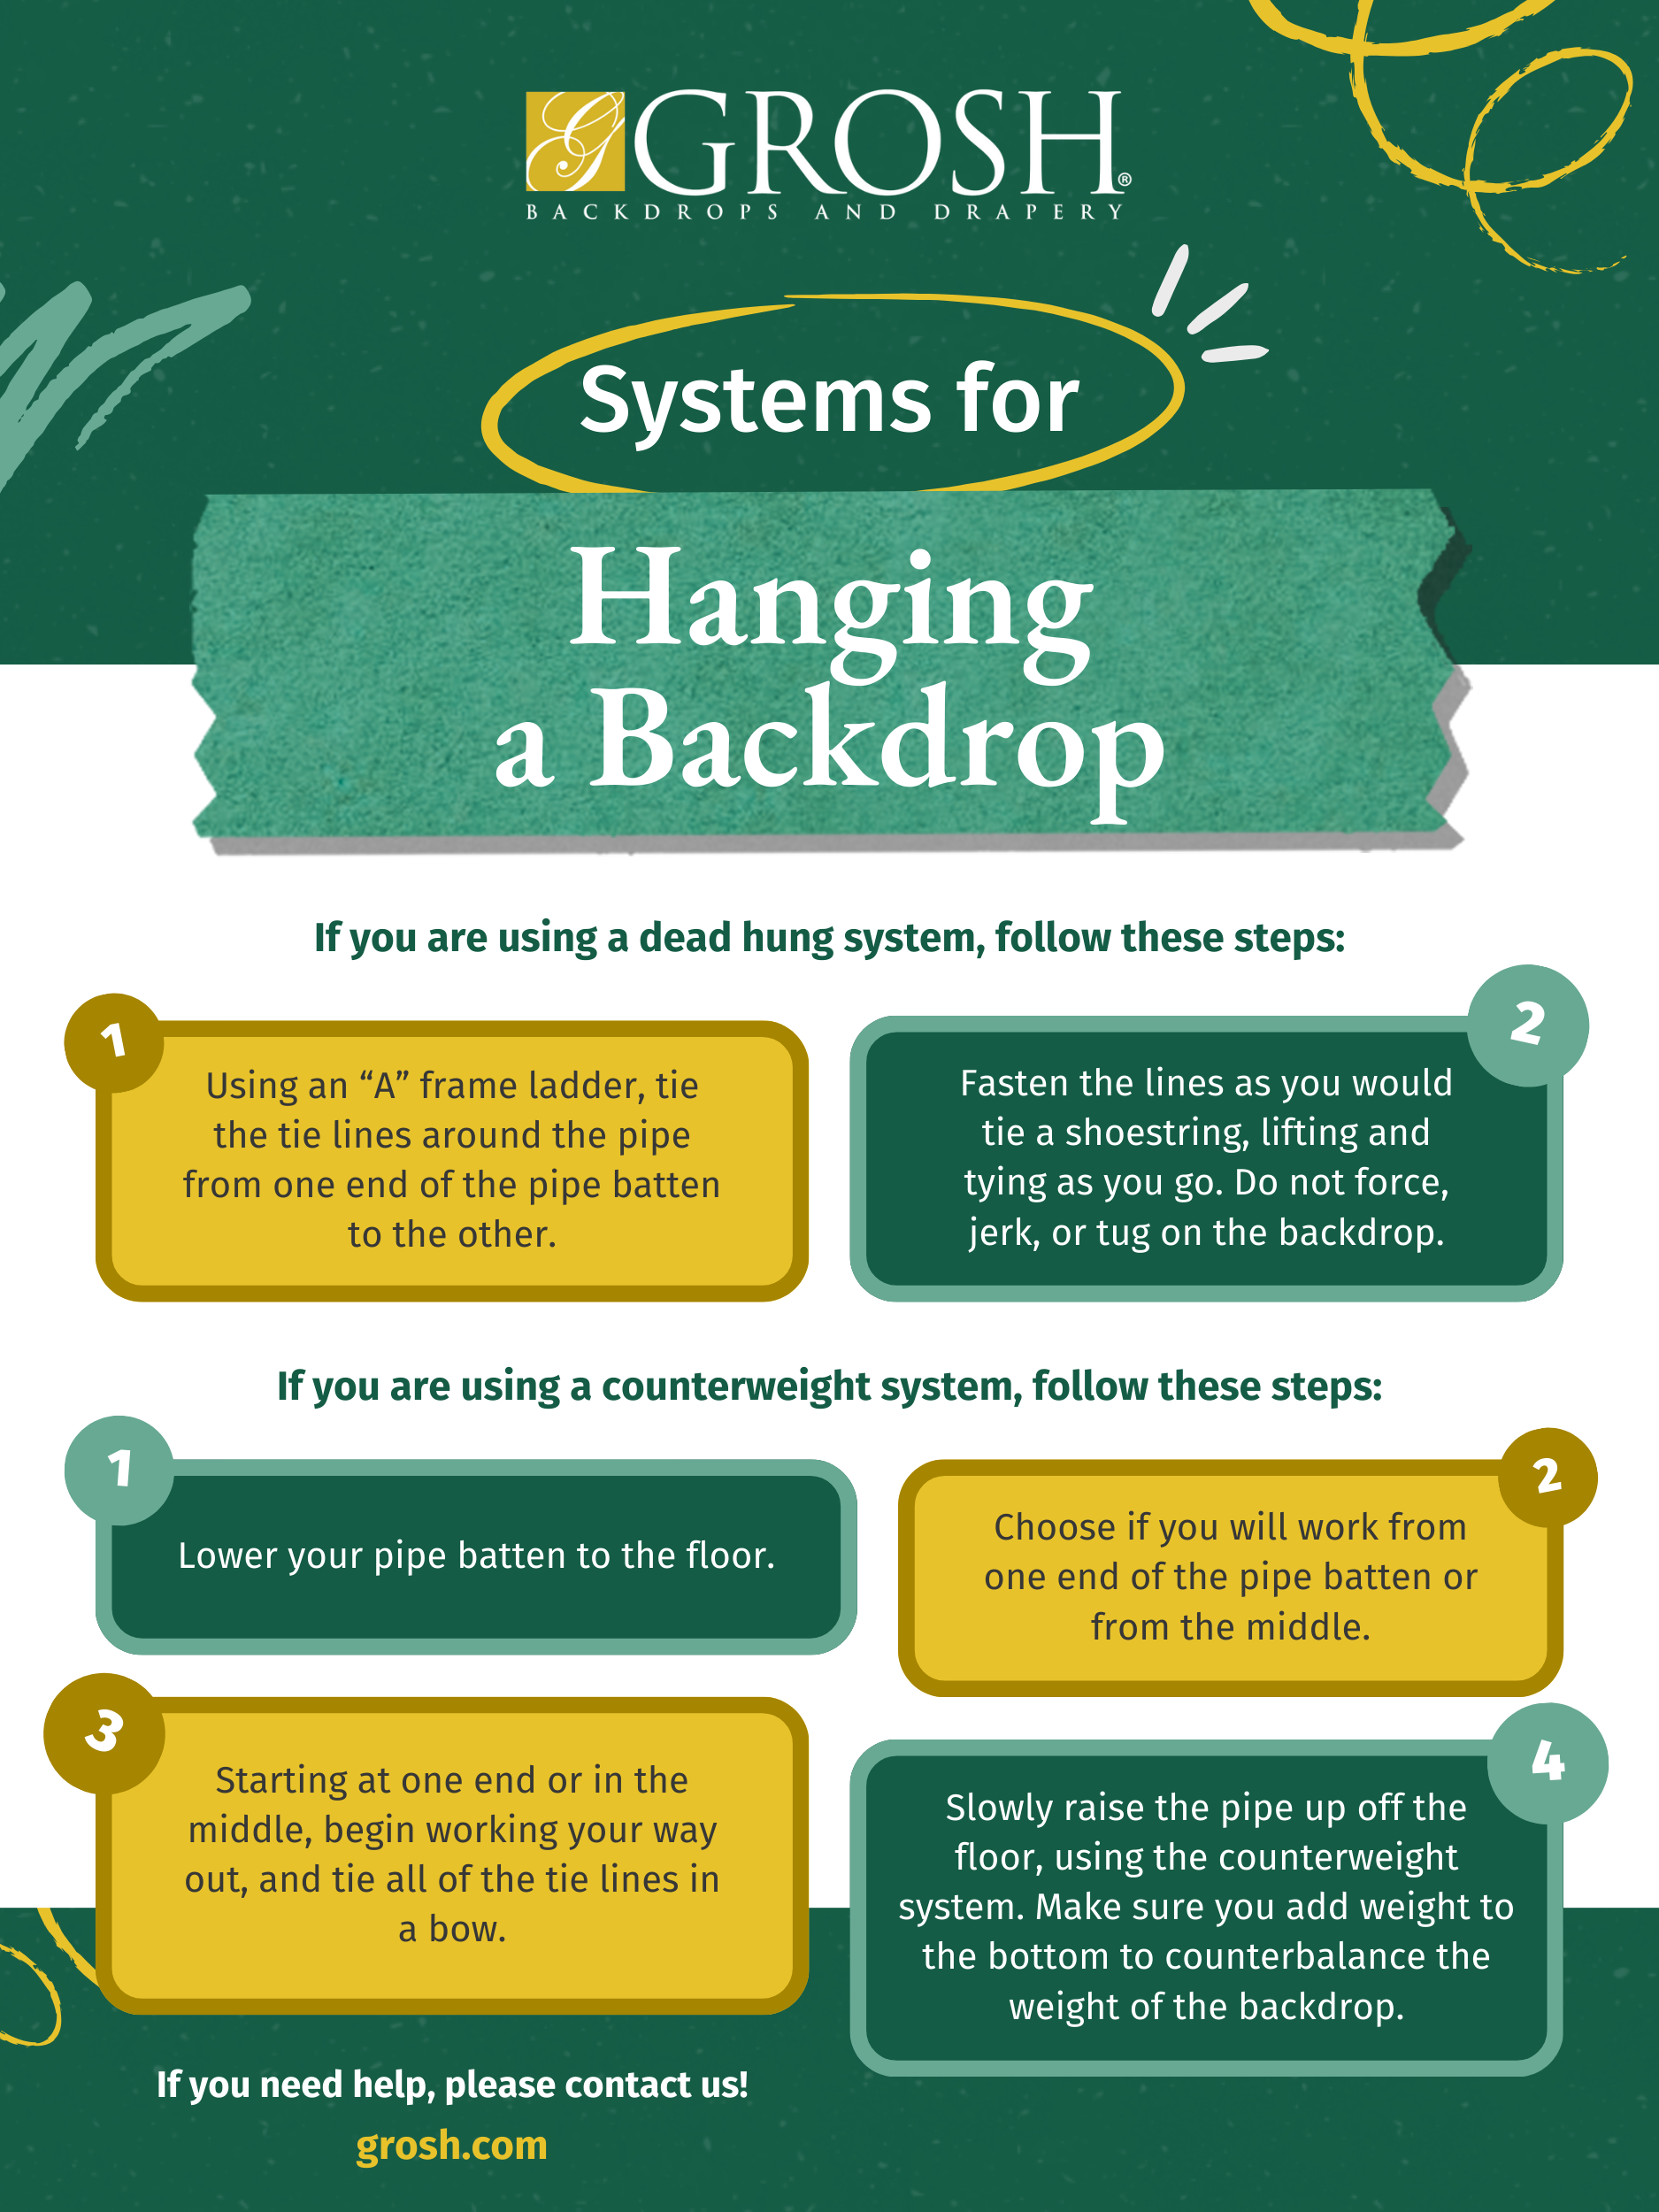 Systems For Hanging a Backdrop